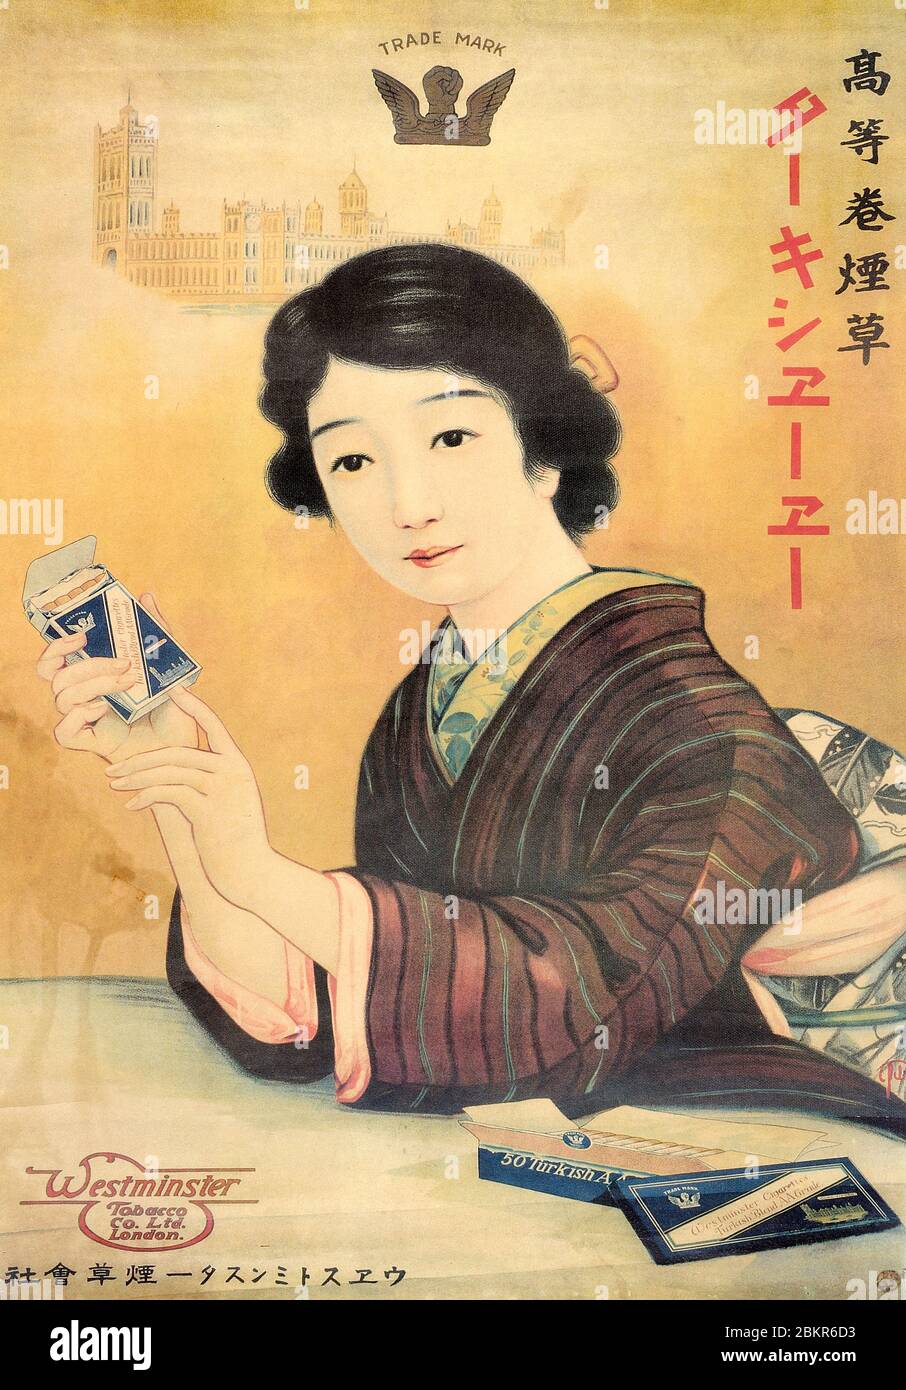 [ 1930s Japan - Japanese Advertising for Cigarettes ] —   Japanese advertising poster ca 1930s for high quality Turkish brand cigarettes produced by the Westminster Tobacco Co. Ltd. A woman with modern hairstyle wearing a kimono holds a pack of cigarettes.  20th century vintage advertising poster. Stock Photo